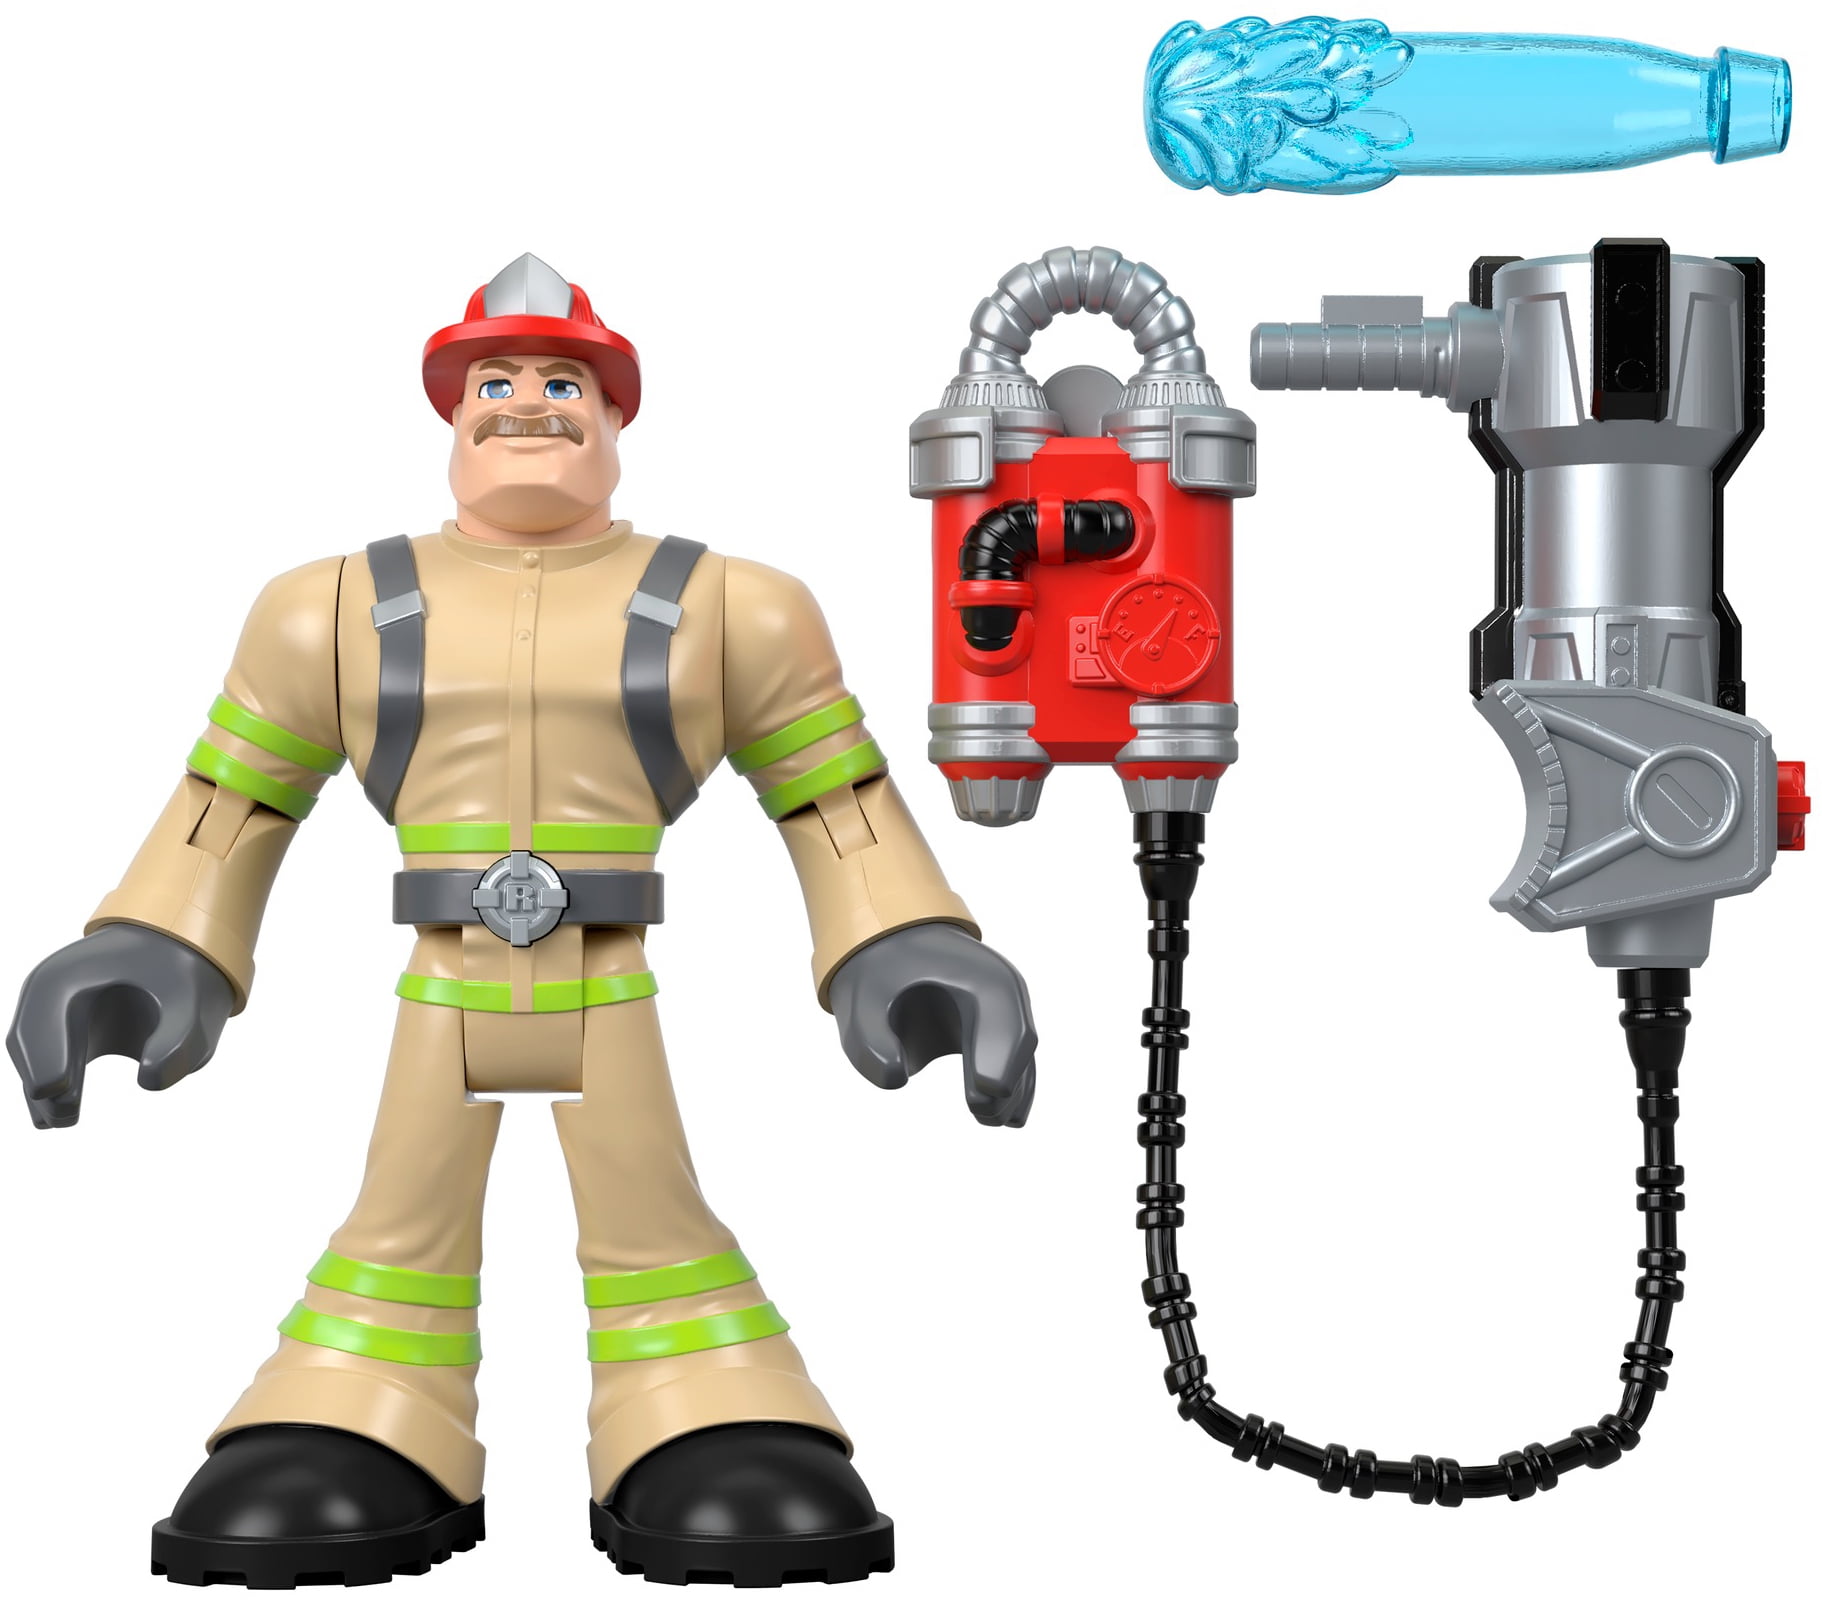 FISHER PRICE RESCUE HEROES POWER MAX BILLY BLAZES FIREFIGHTER COMPLETE 